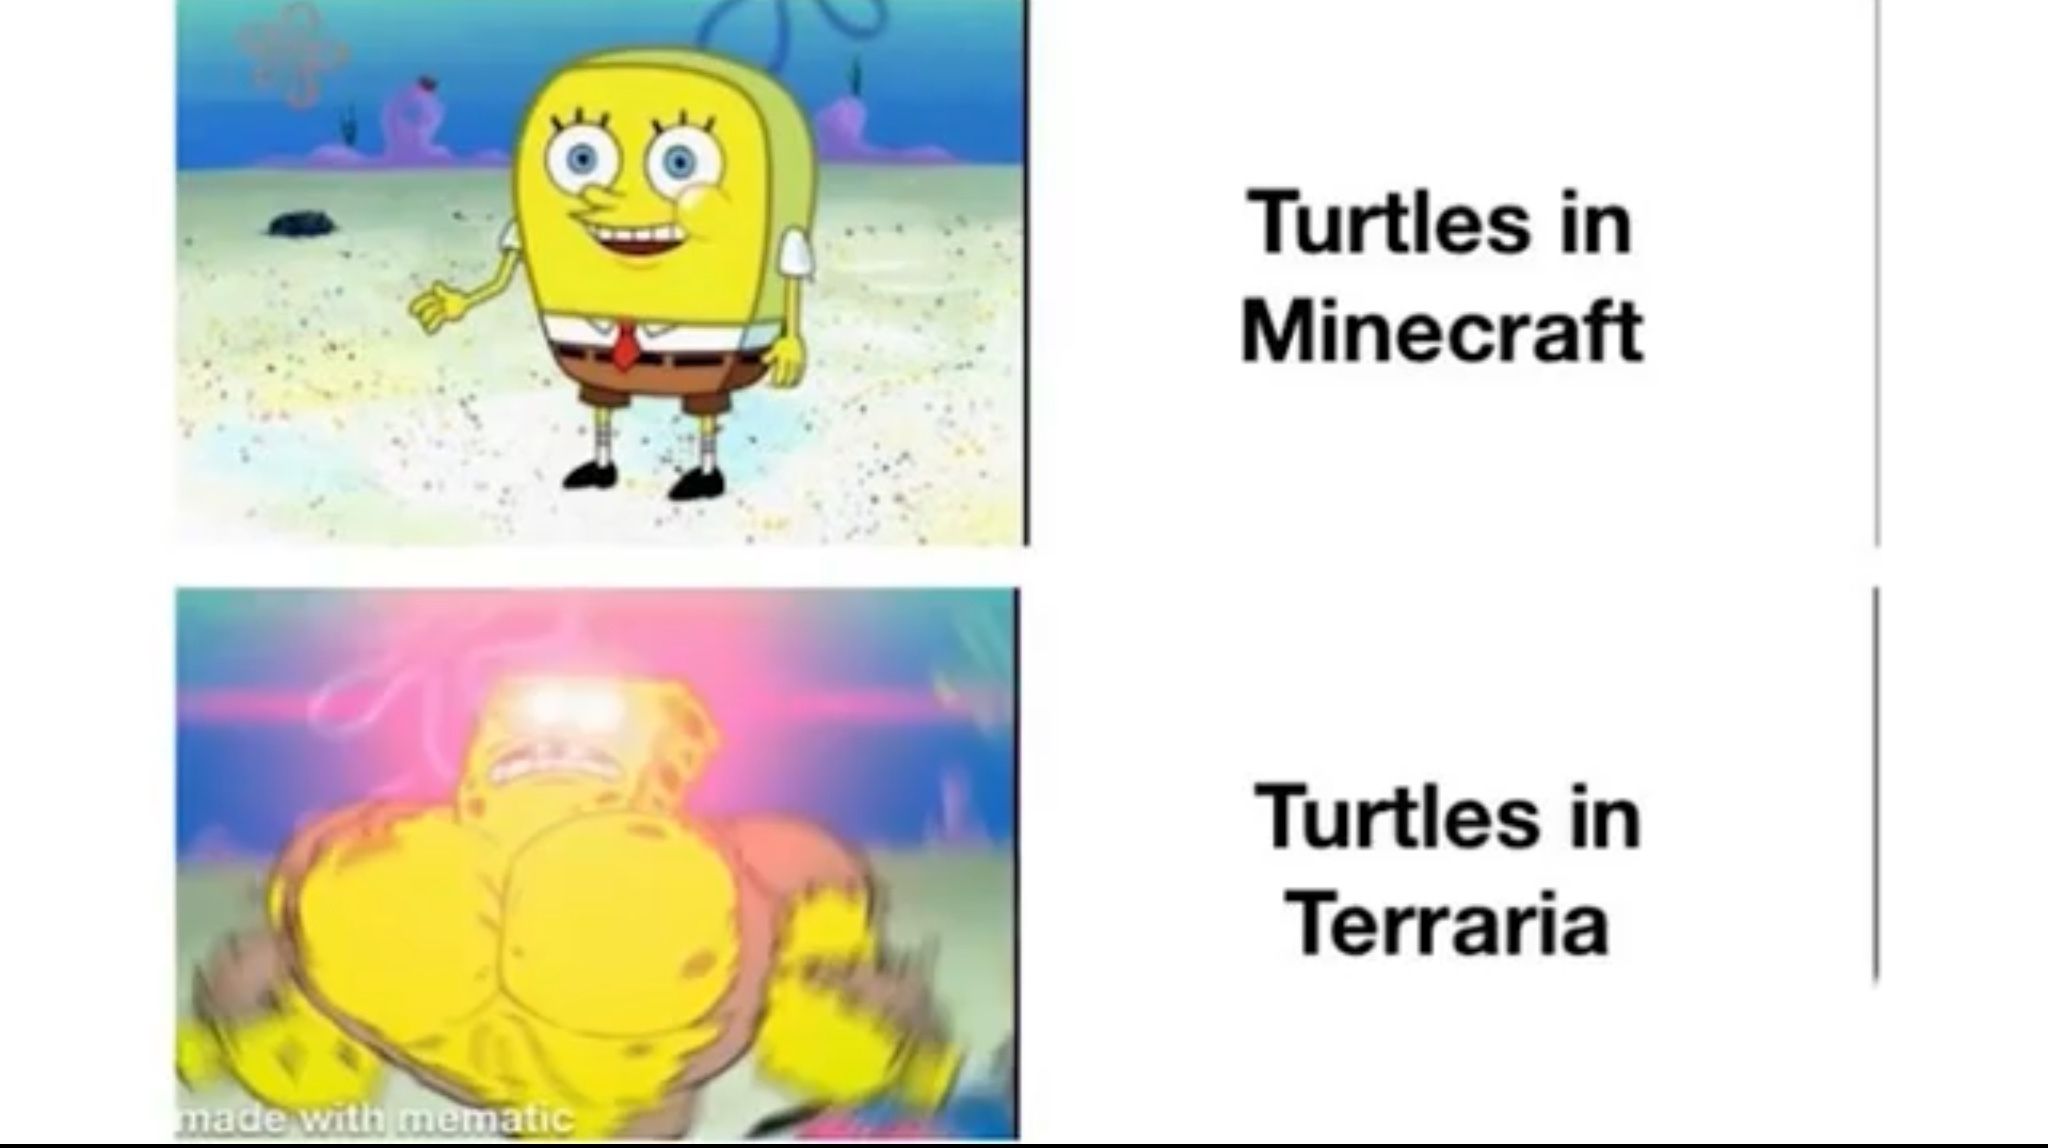 meme about turtles in both games with spongebob.